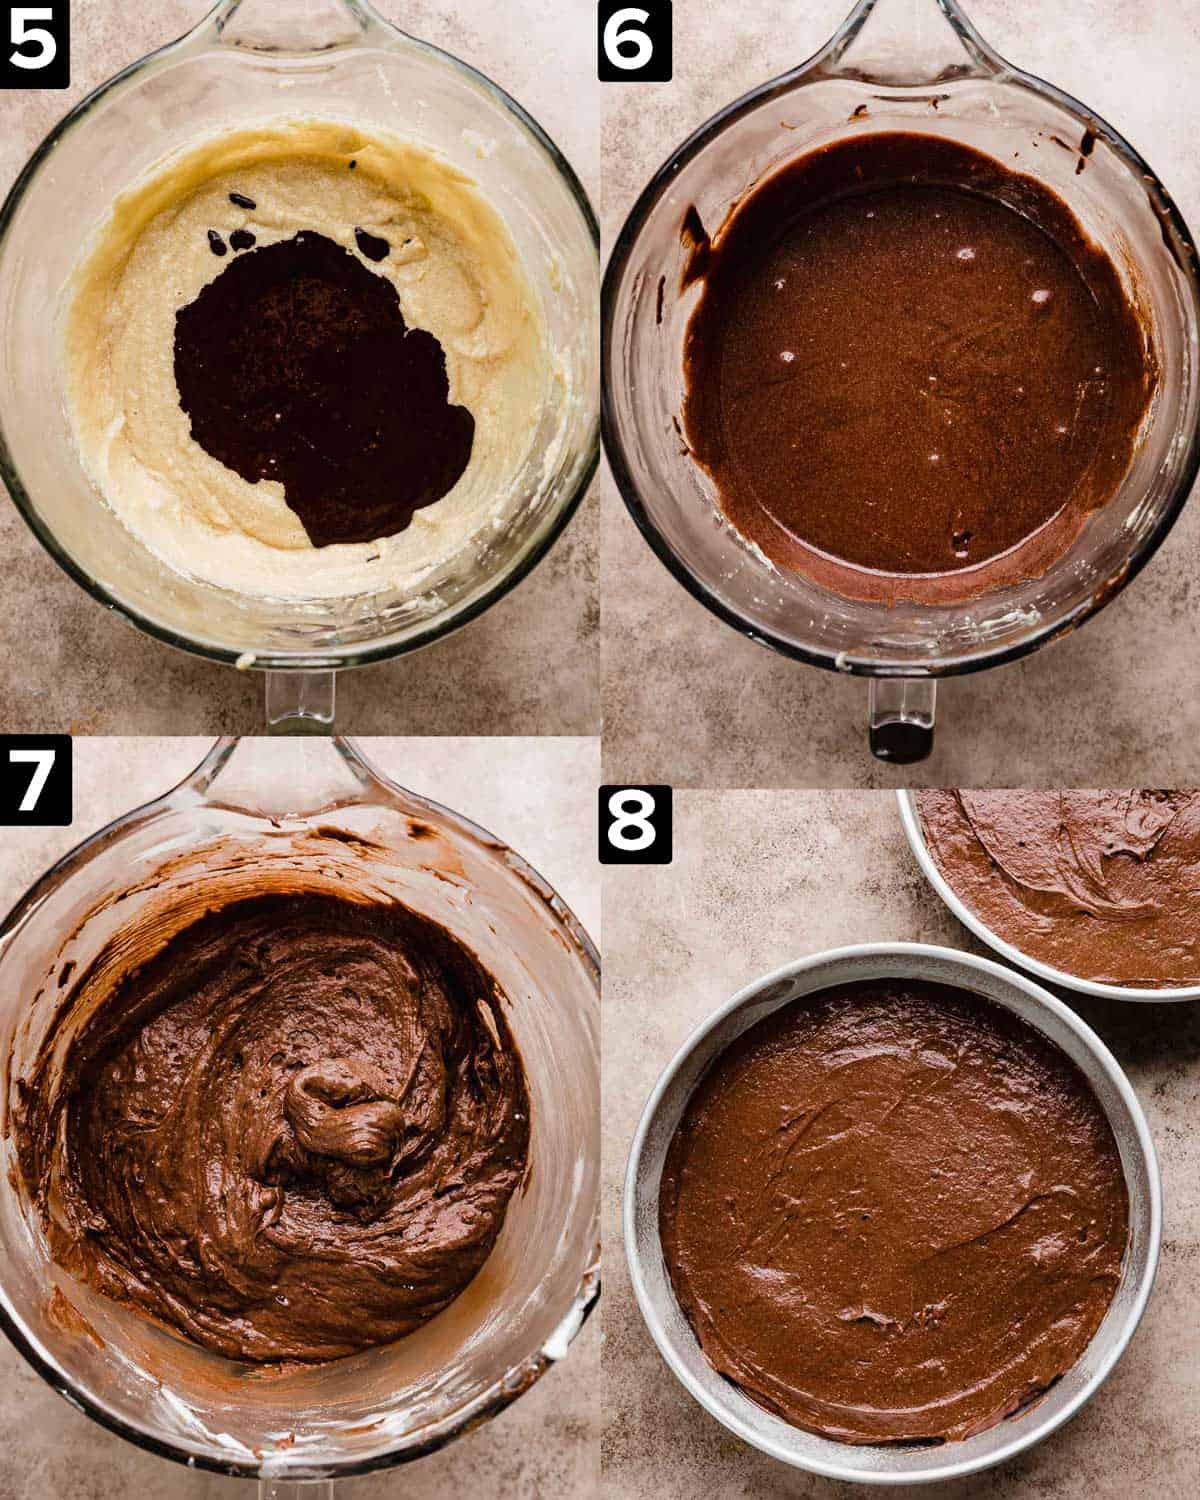 Top left image is yellow mixture in a glass bowl with melted chocolate overtop. Top right image is a brown wet ingredients to make Traditional German Chocolate Cake in a glass bowl. Bottom left image is Traditional German Chocolate Cake batter in a glass bowl. Bottom right image is Traditional German Chocolate Cake batter in a circle pan.